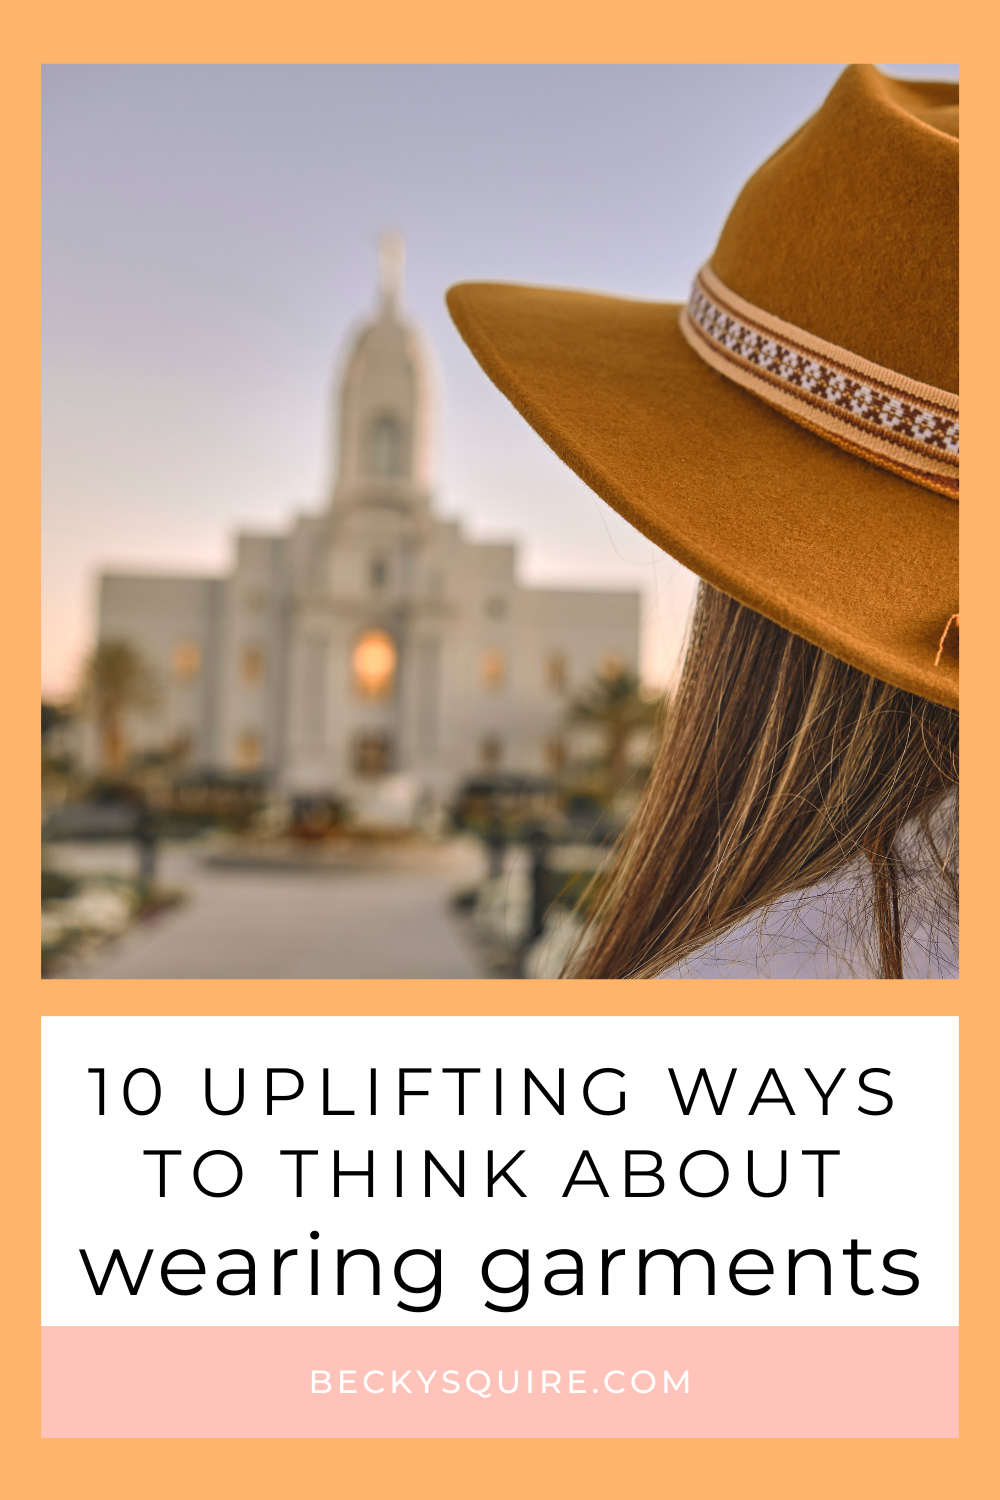 uplifting ways to think about wearing garments